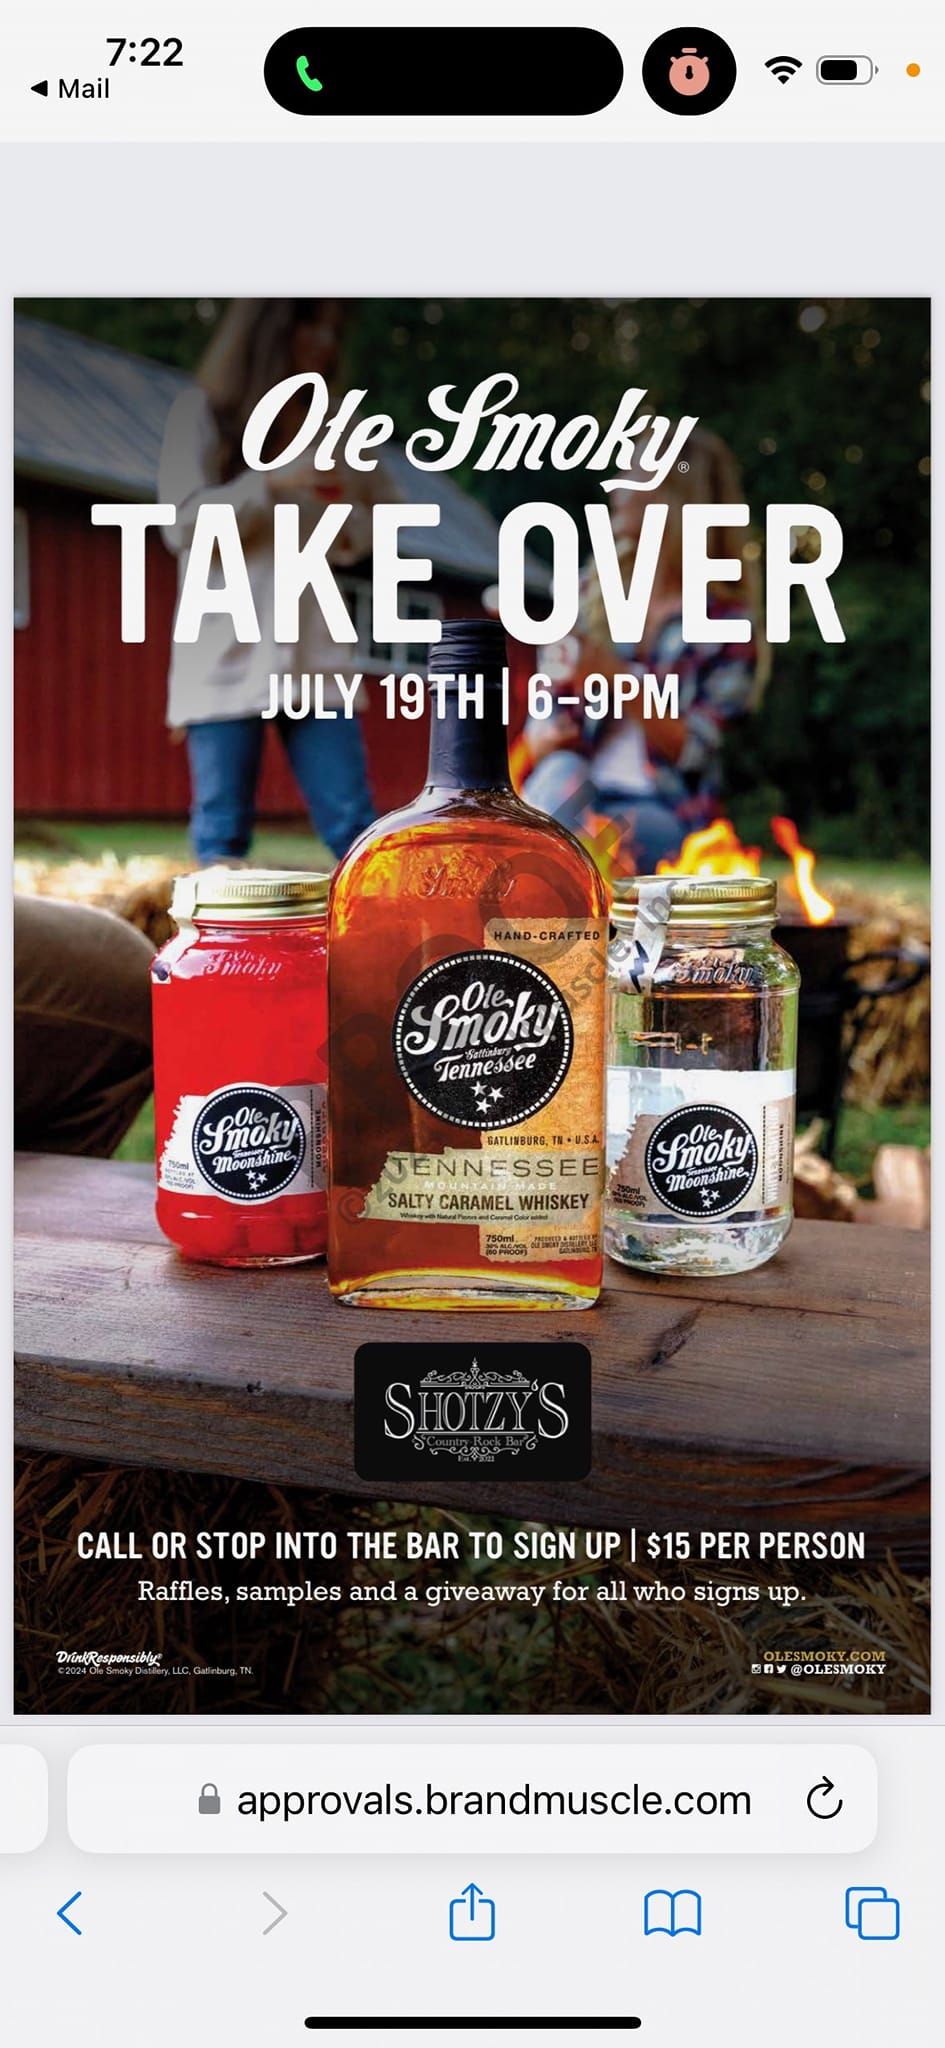 Ole Smoky TAKE OVER at Shotzy's 